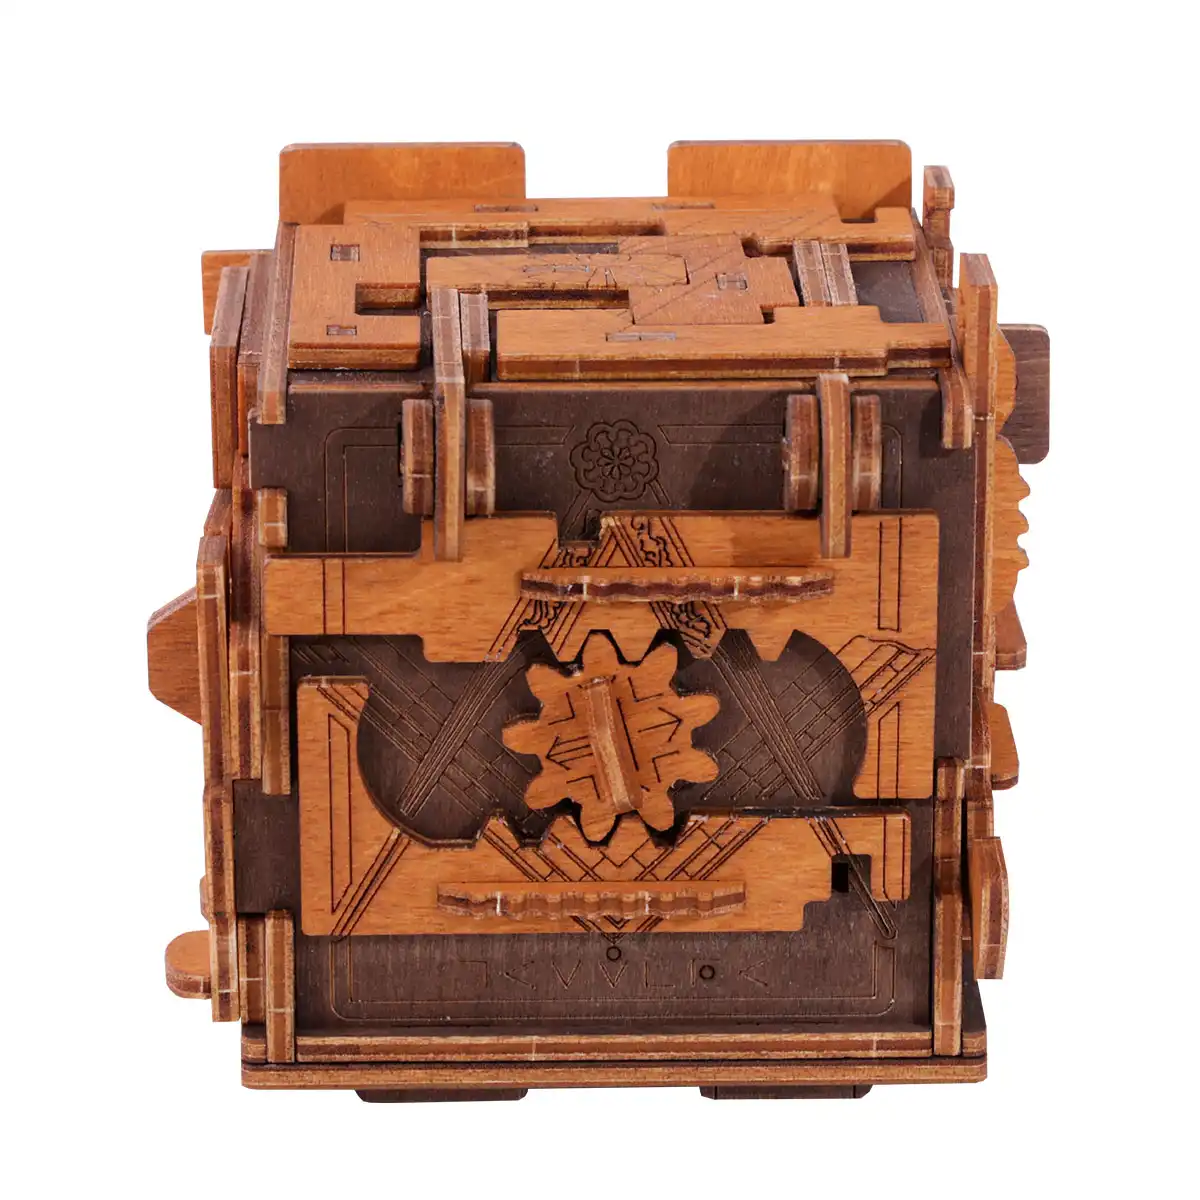  WOODEN.CITY Treasure Chest Escape Room in a Box - Hard Puzzle  Box for Adults Wooden Kit - Cluebox Escape Puzzle - 3D Escape Room Puzzles  - Wooden Mechanical Puzzles for Adults - Pirates Puzzle Box : Toys & Games